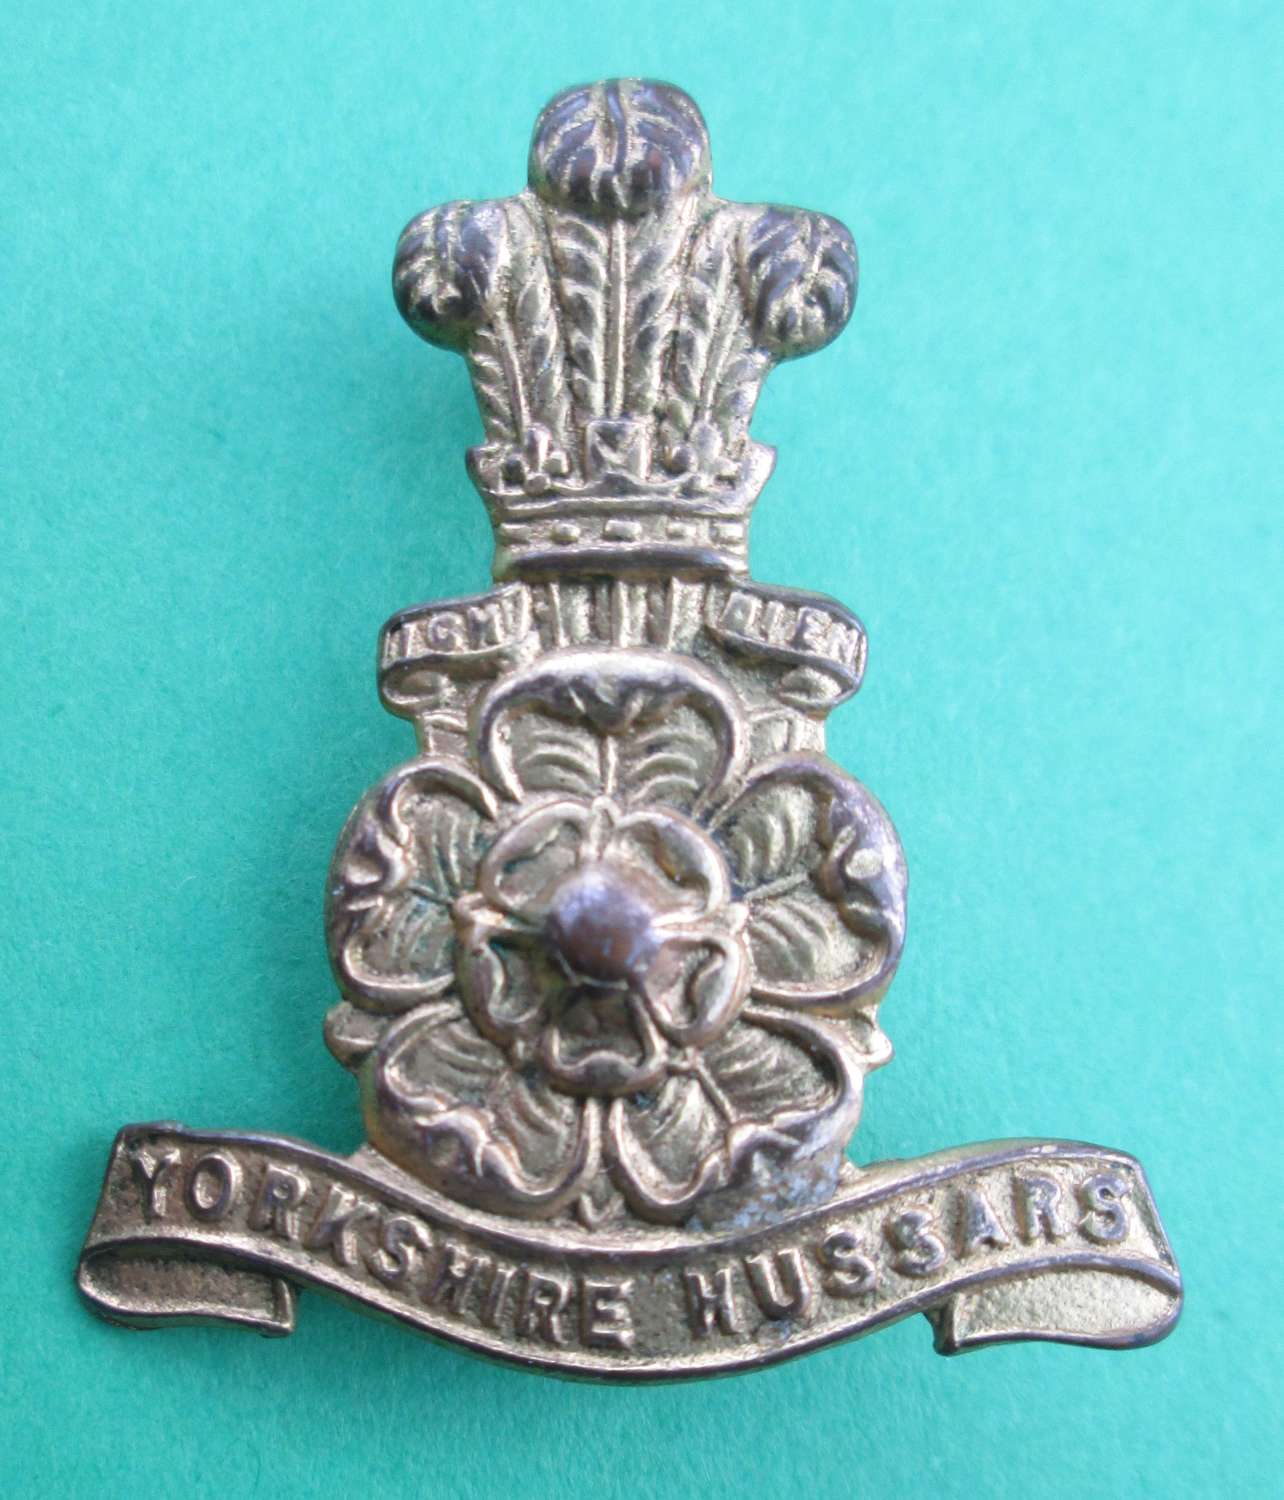 A YORKSHIRE HUSSARS SWEETHEART BROOCH